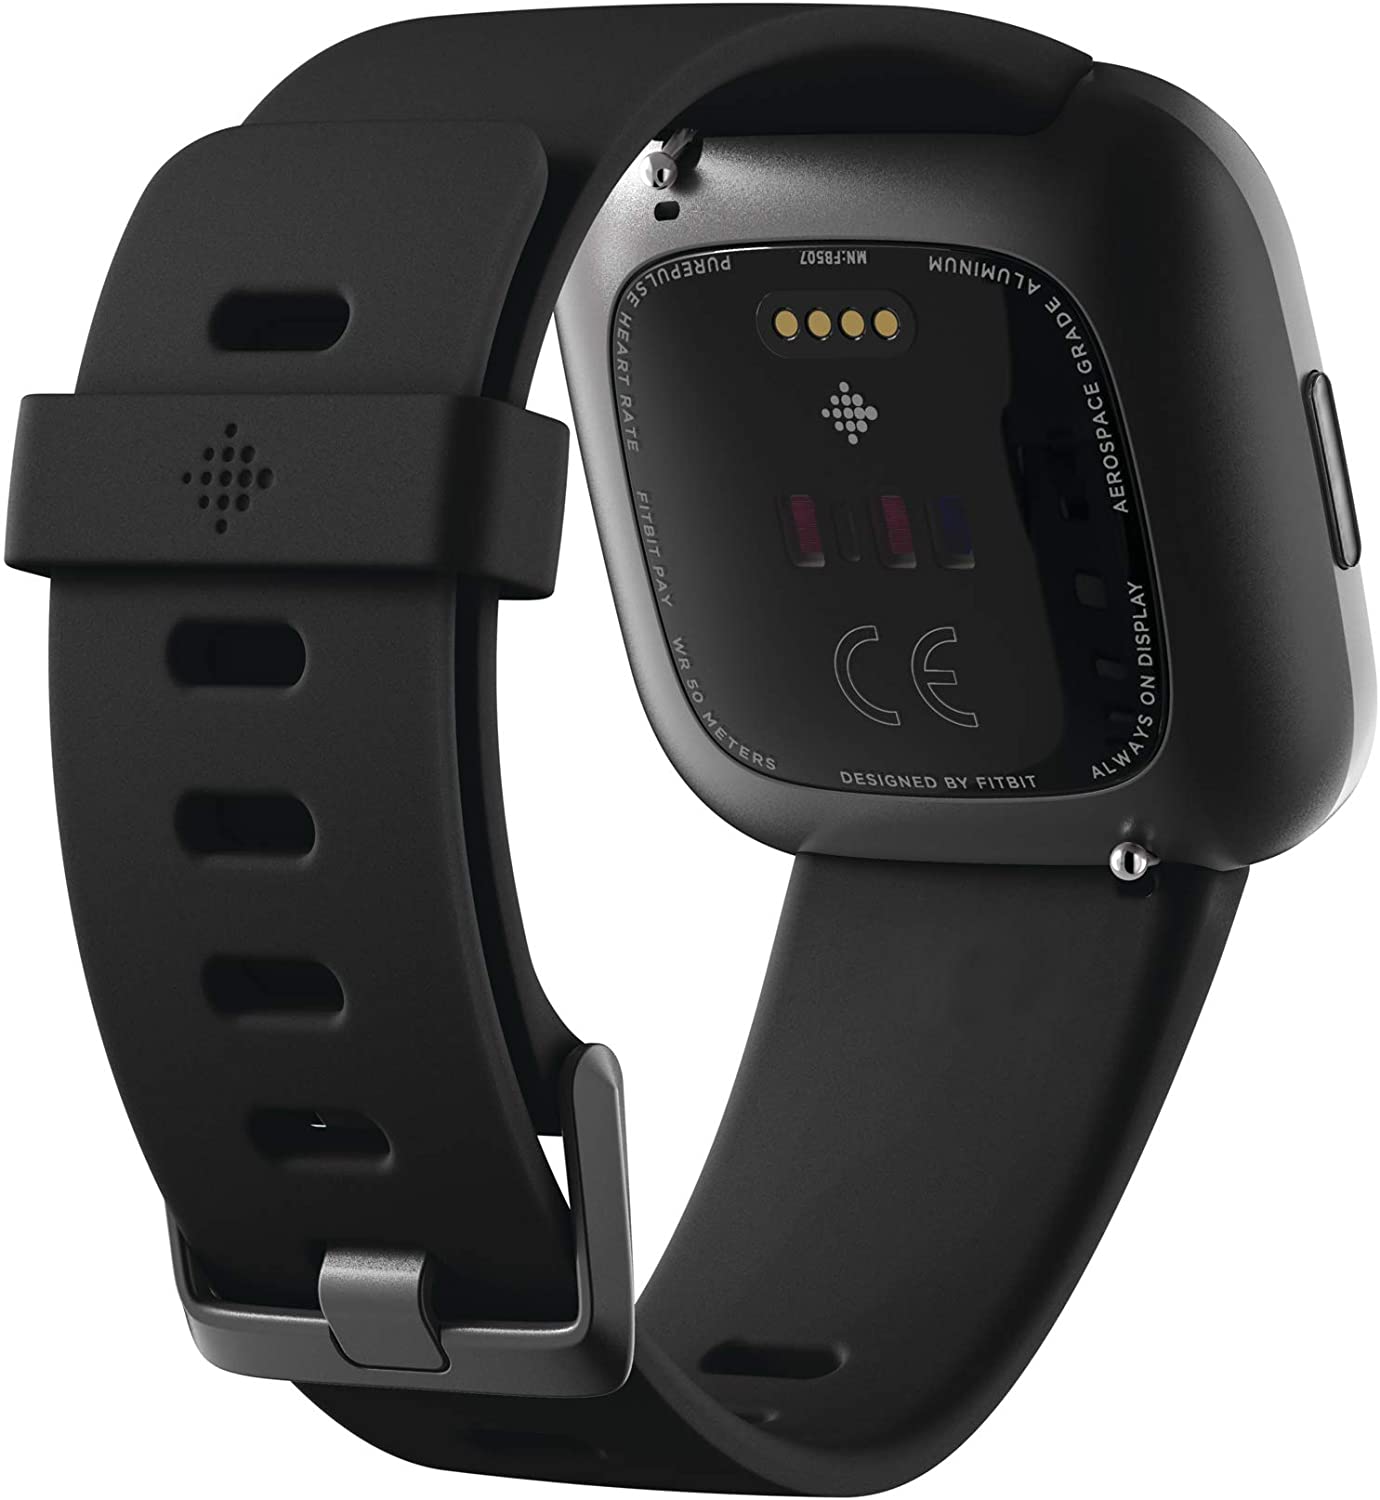 Fitbit Luxe-Fitness and Wellness-Tracker with Stress Management,  Sleep-Tracking and 24/7 Heart Rate, Black/Graphite, One Size (S & L Bands  Included)